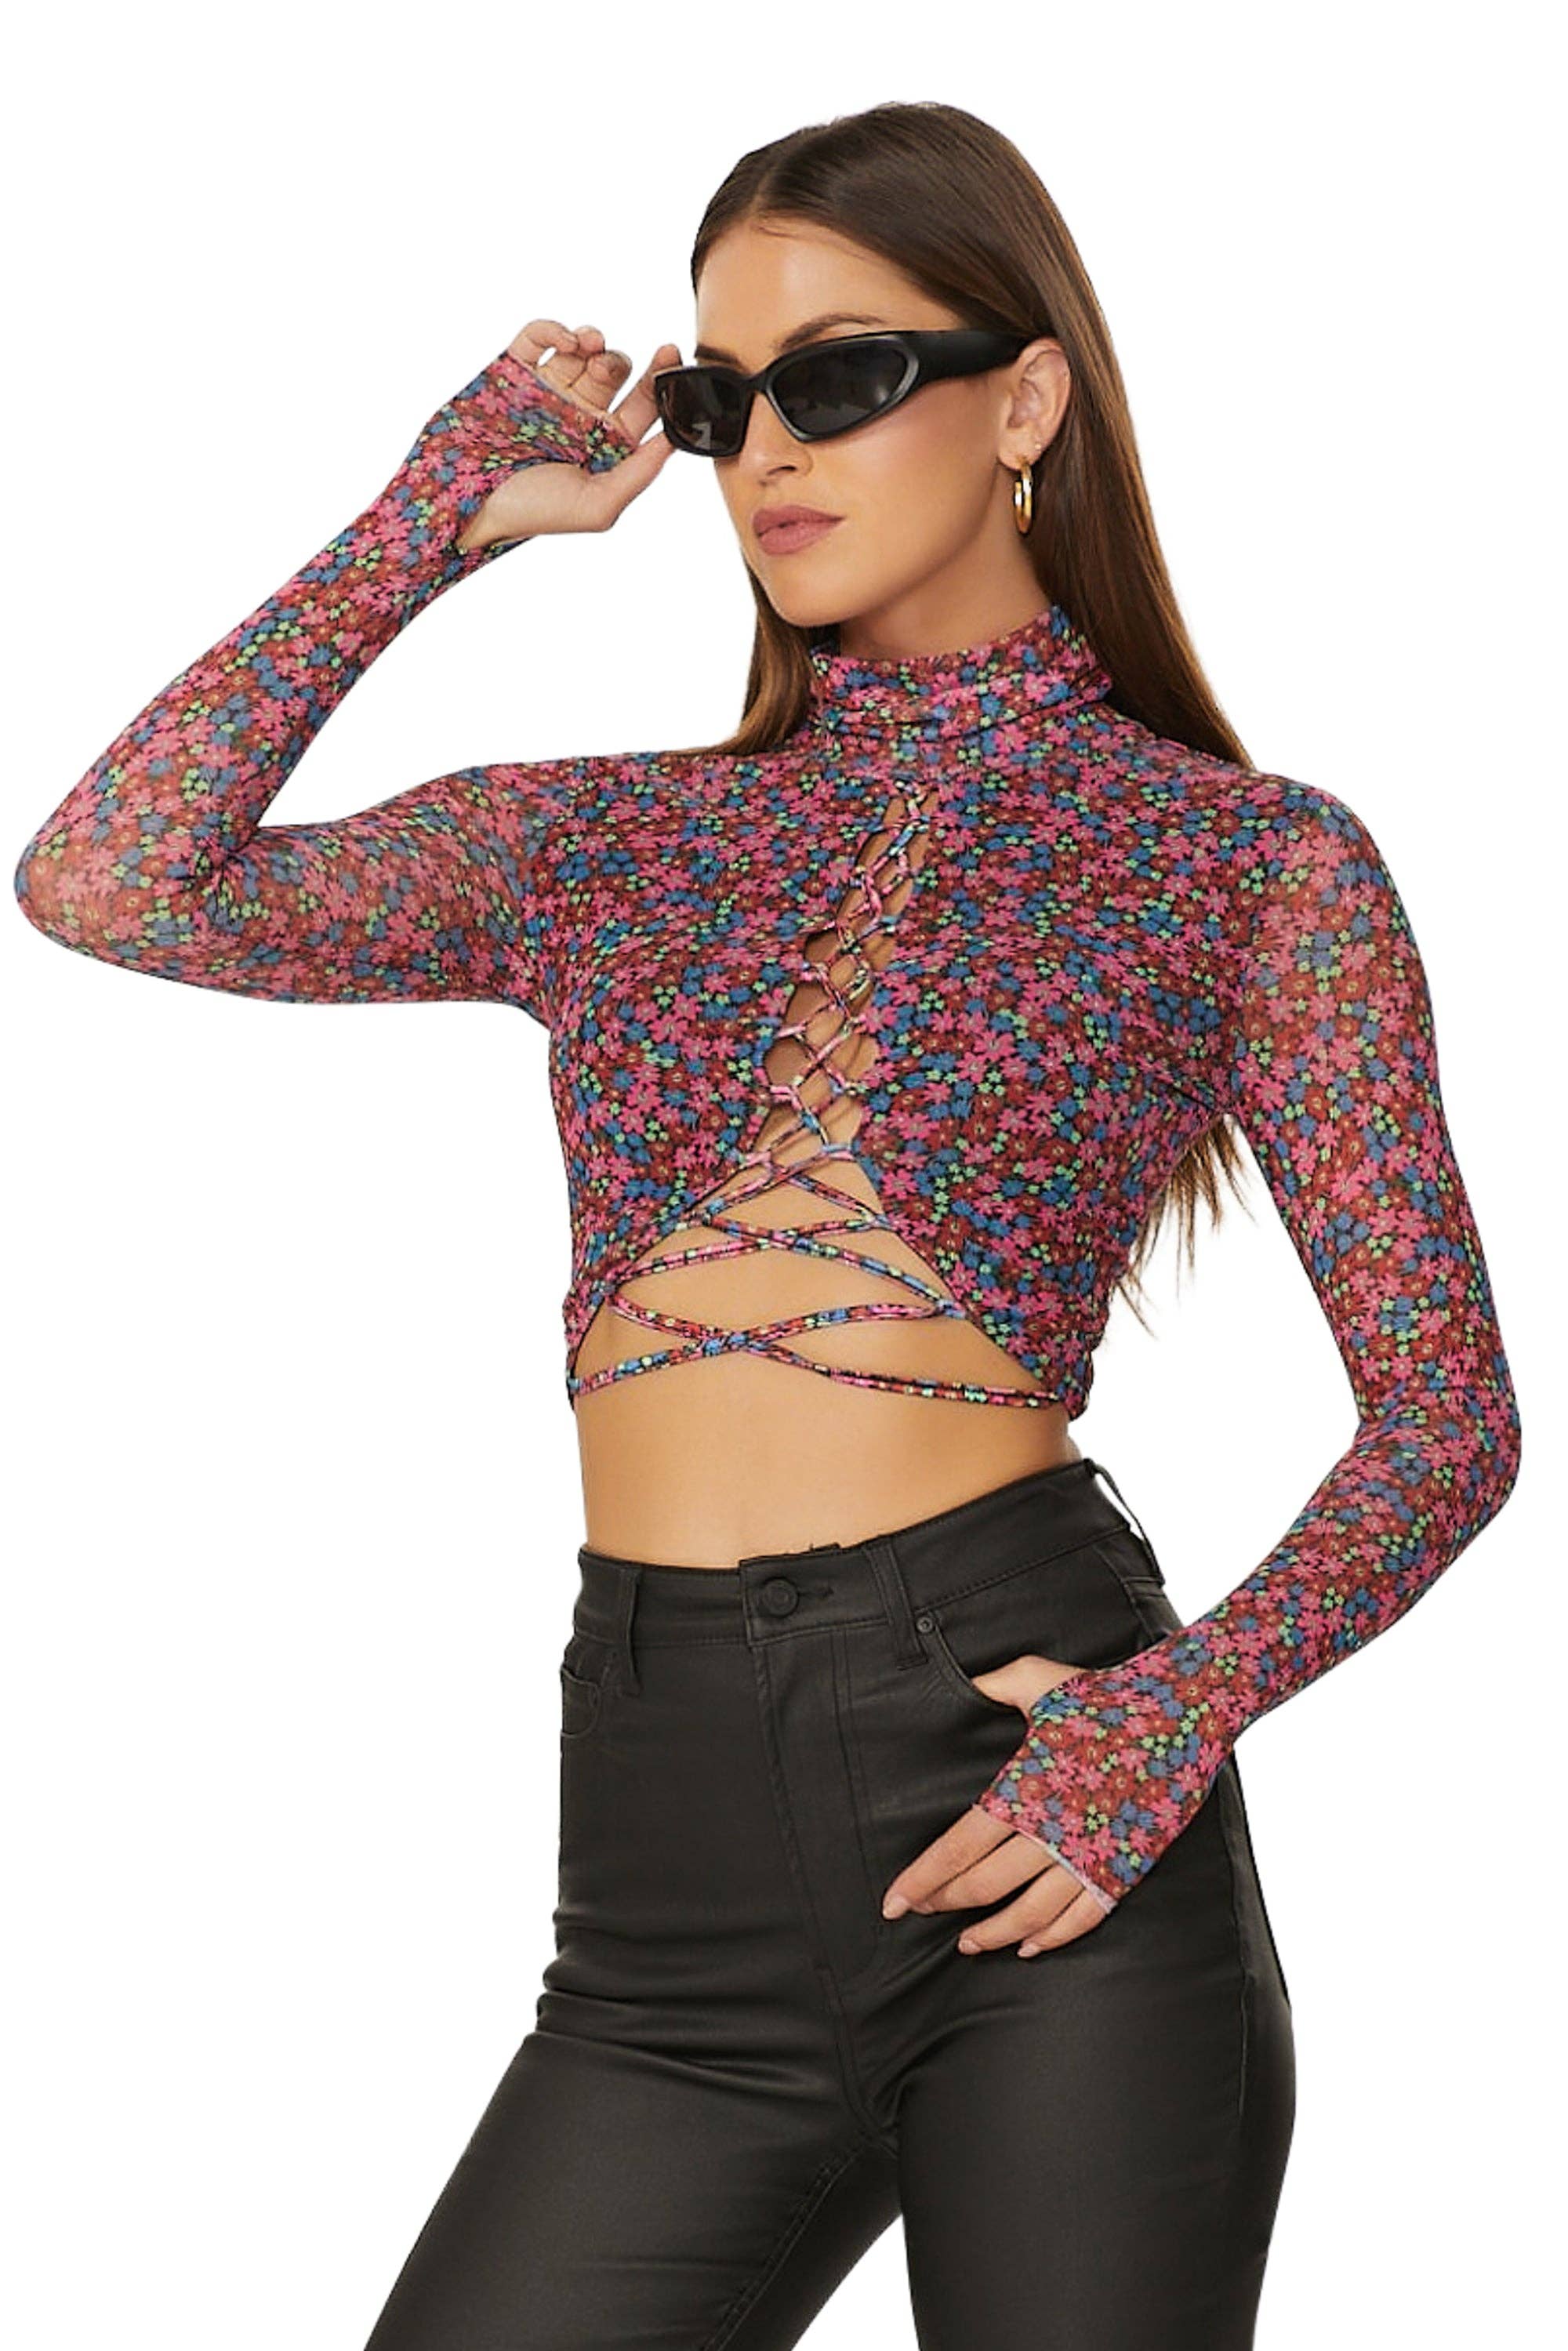 AFRM - Lela Top - Red Ditsy